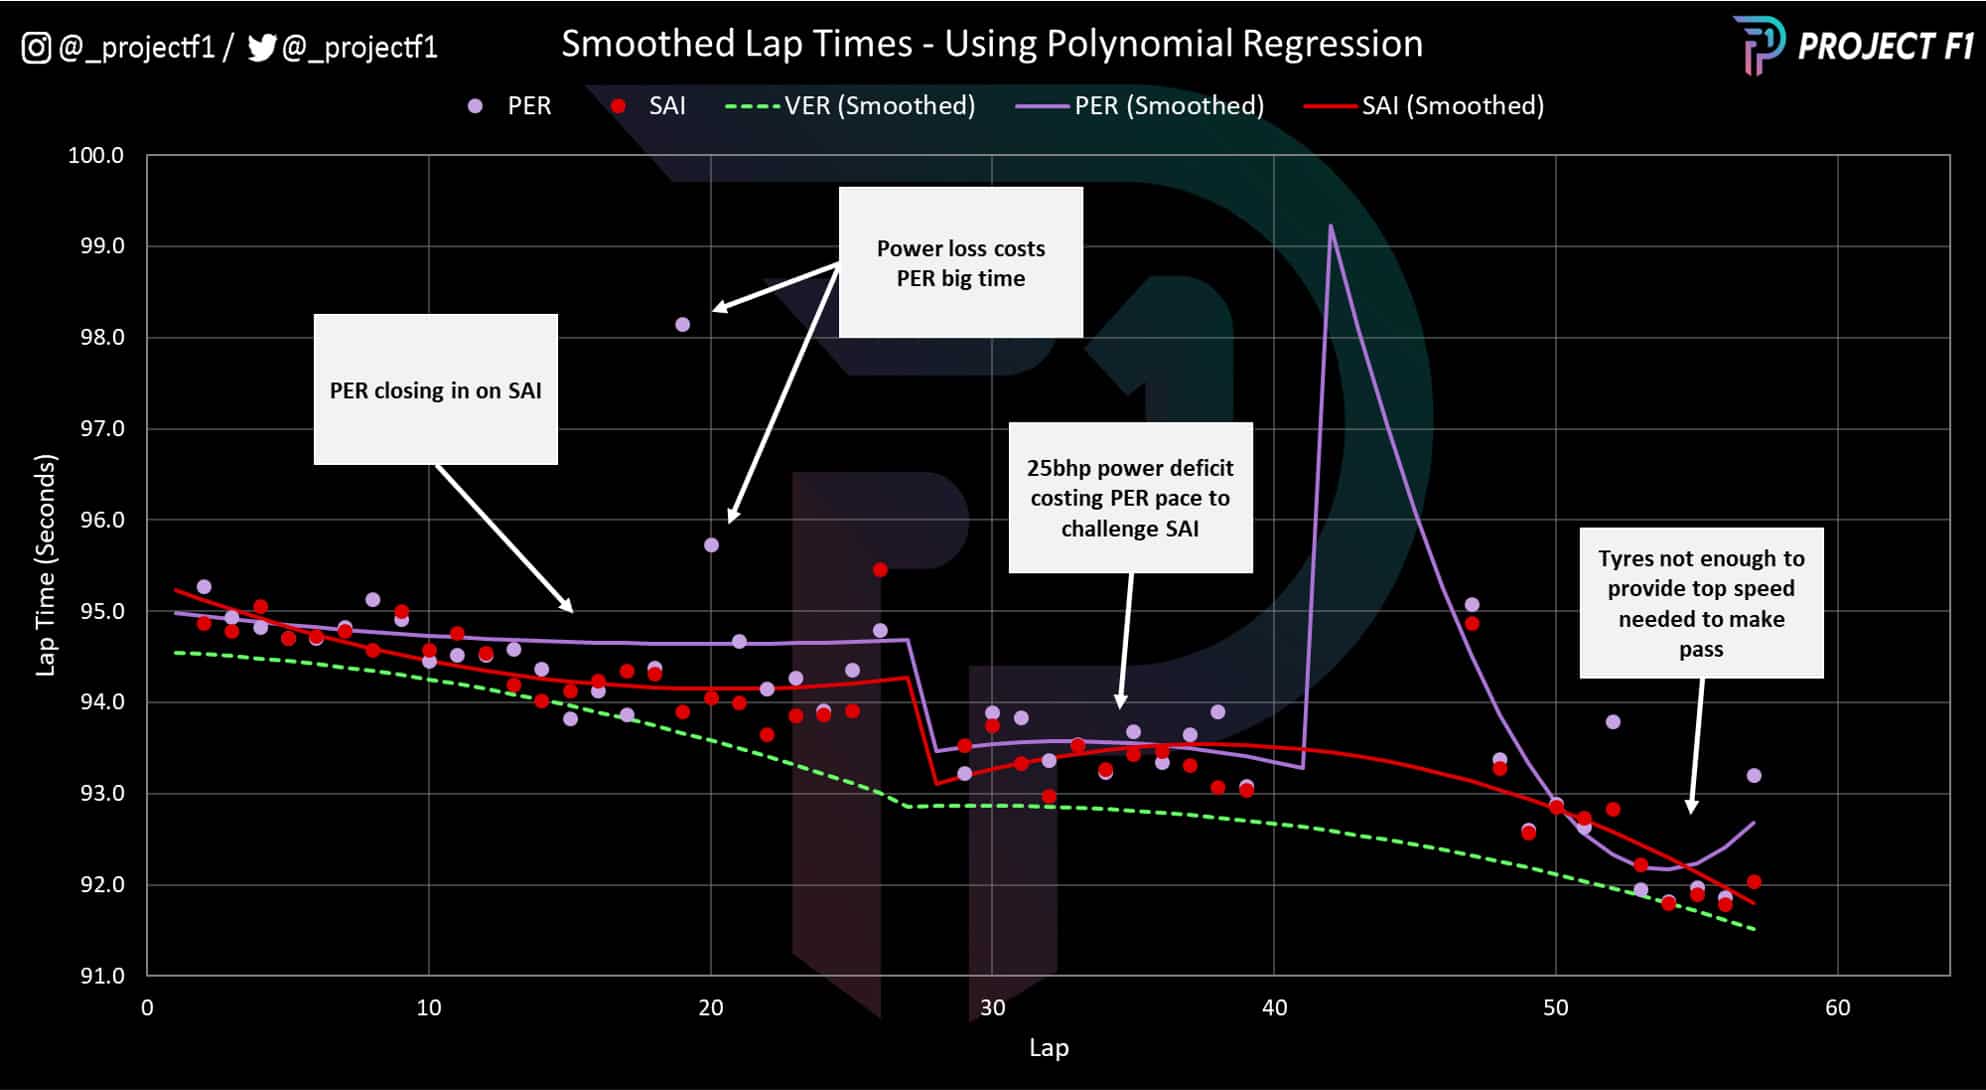 Project F1 Miami smoothed lap times graph